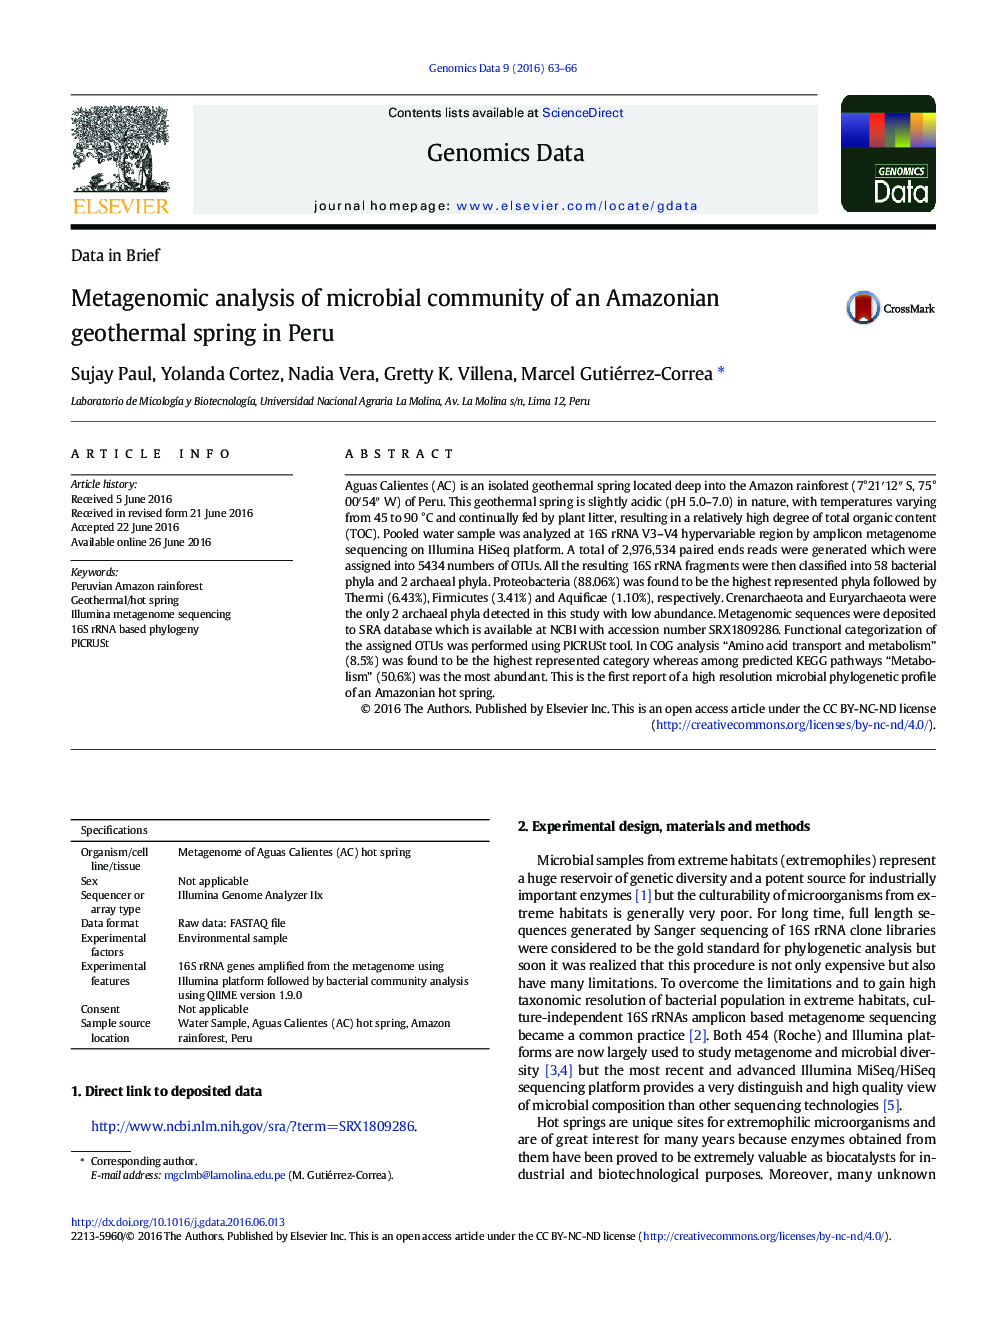 Metagenomic analysis of microbial community of an Amazonian geothermal spring in Peru